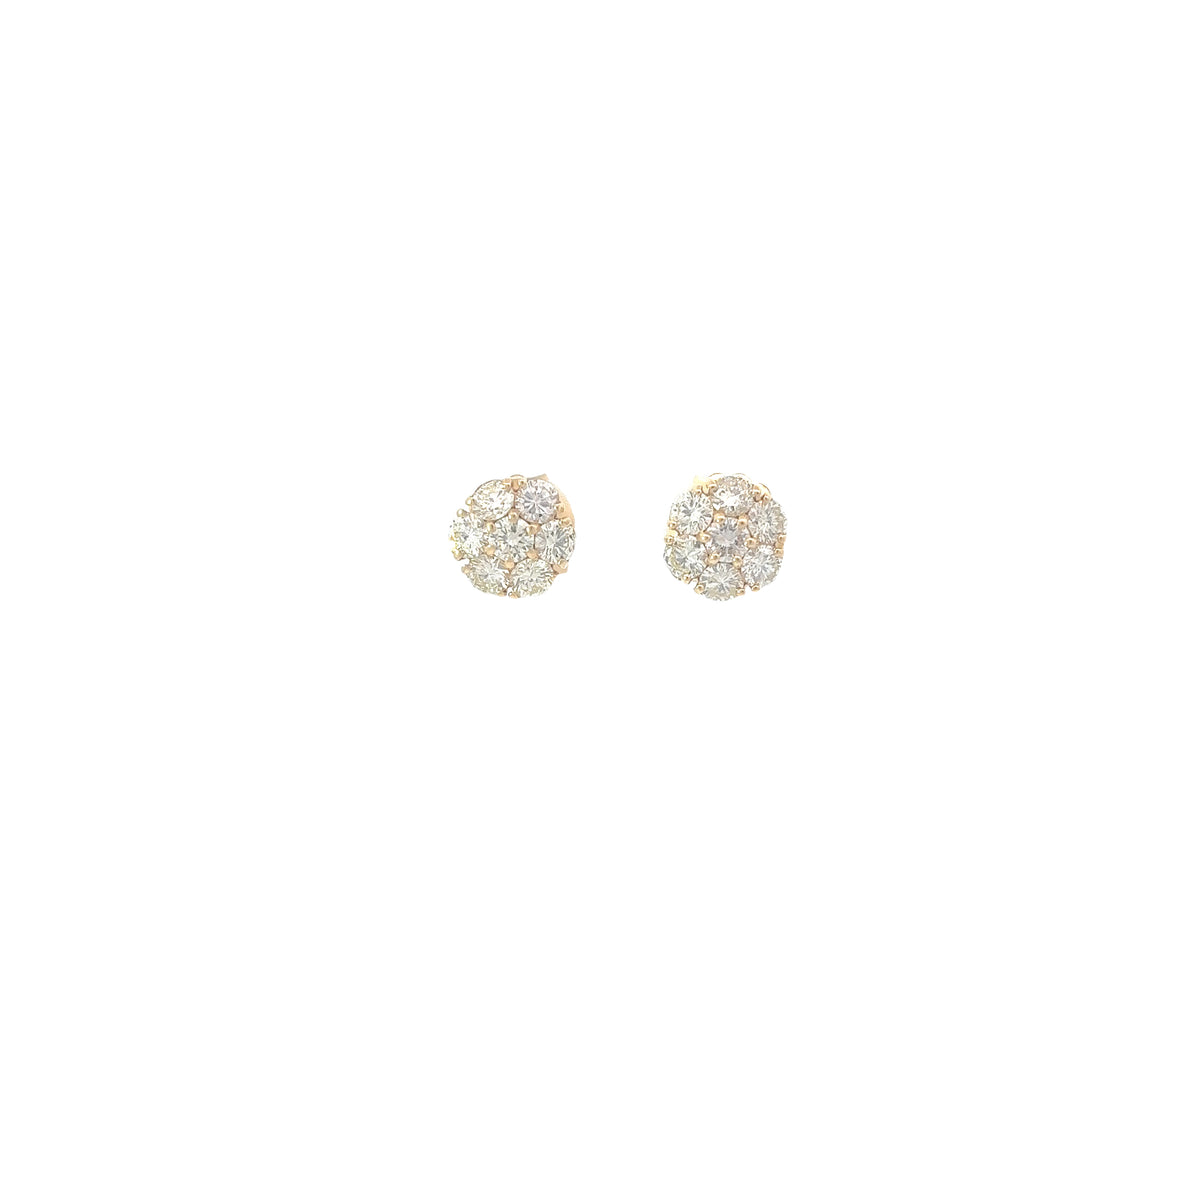 14k Yellow Gold 2.25ct G SI1 Round Diamond Cluster Earrings